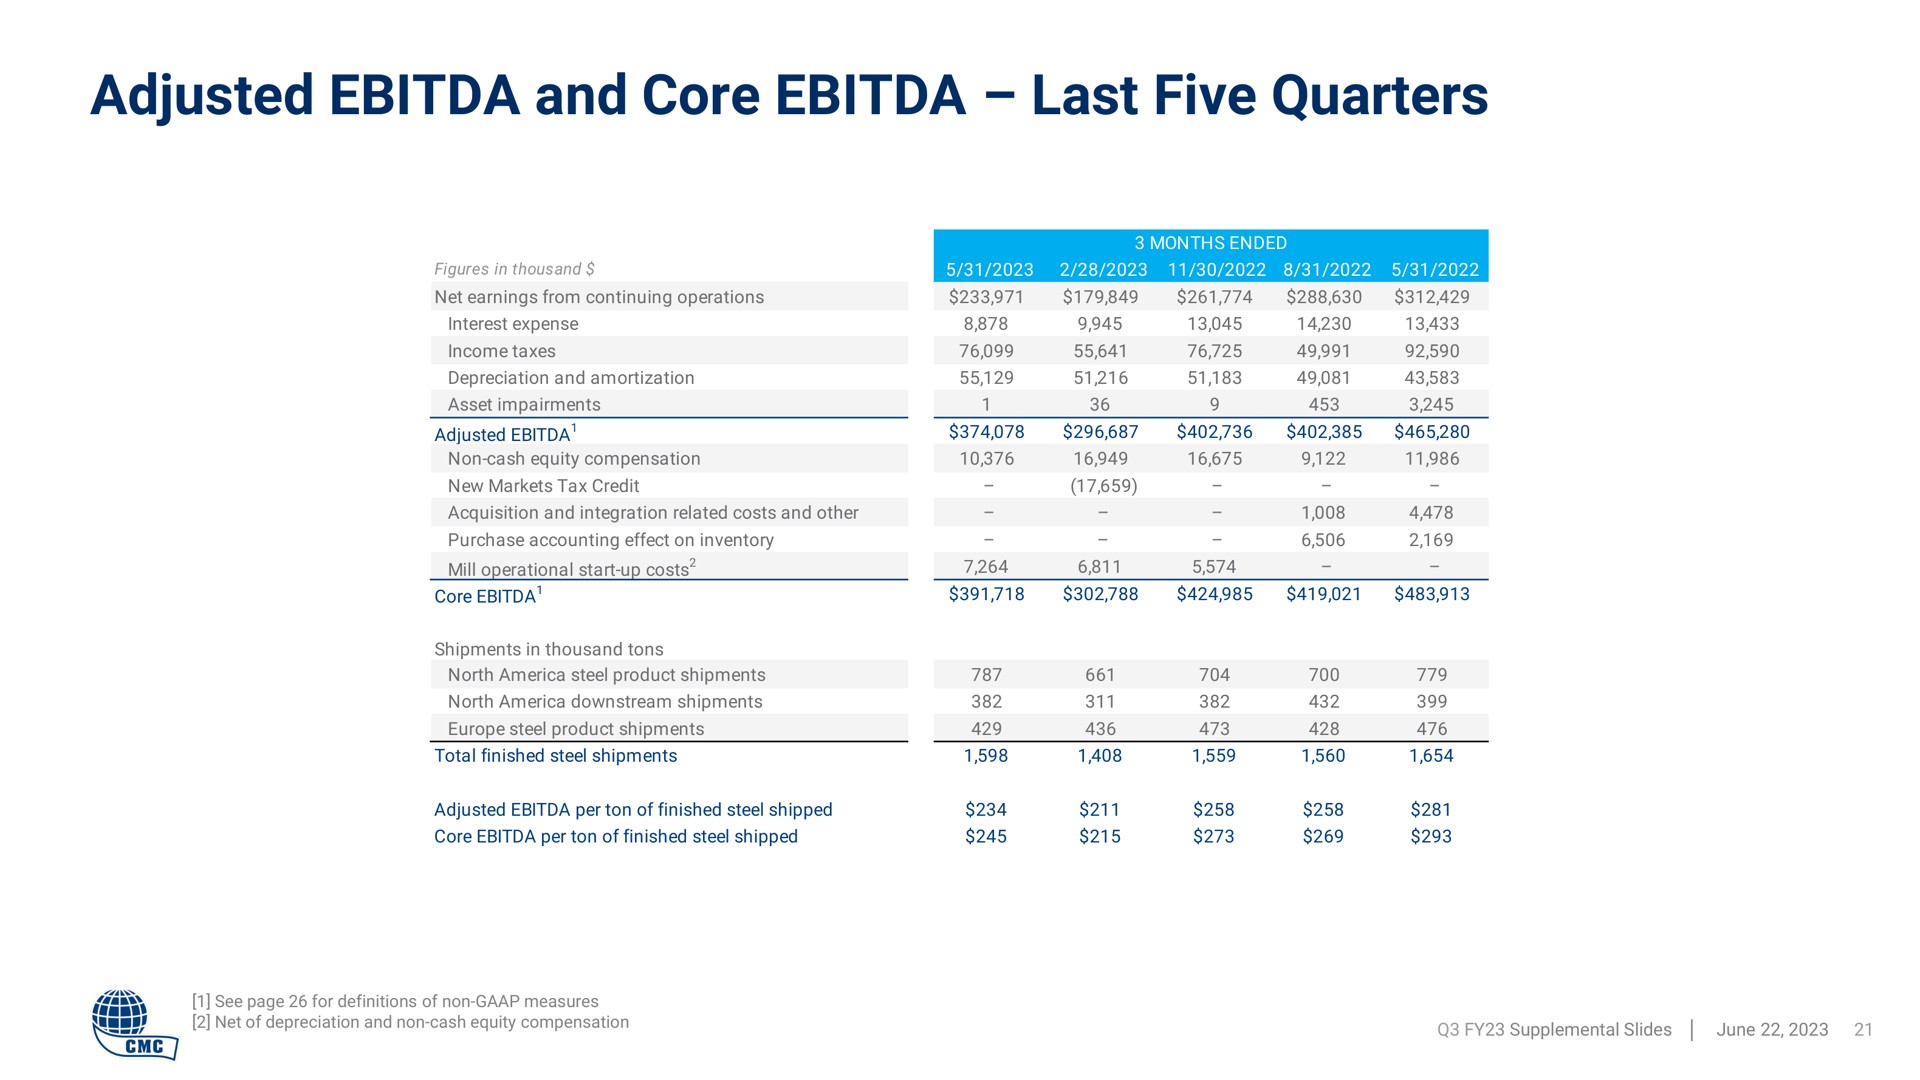 adjusted and core last five quarters | Commercial Metals Company